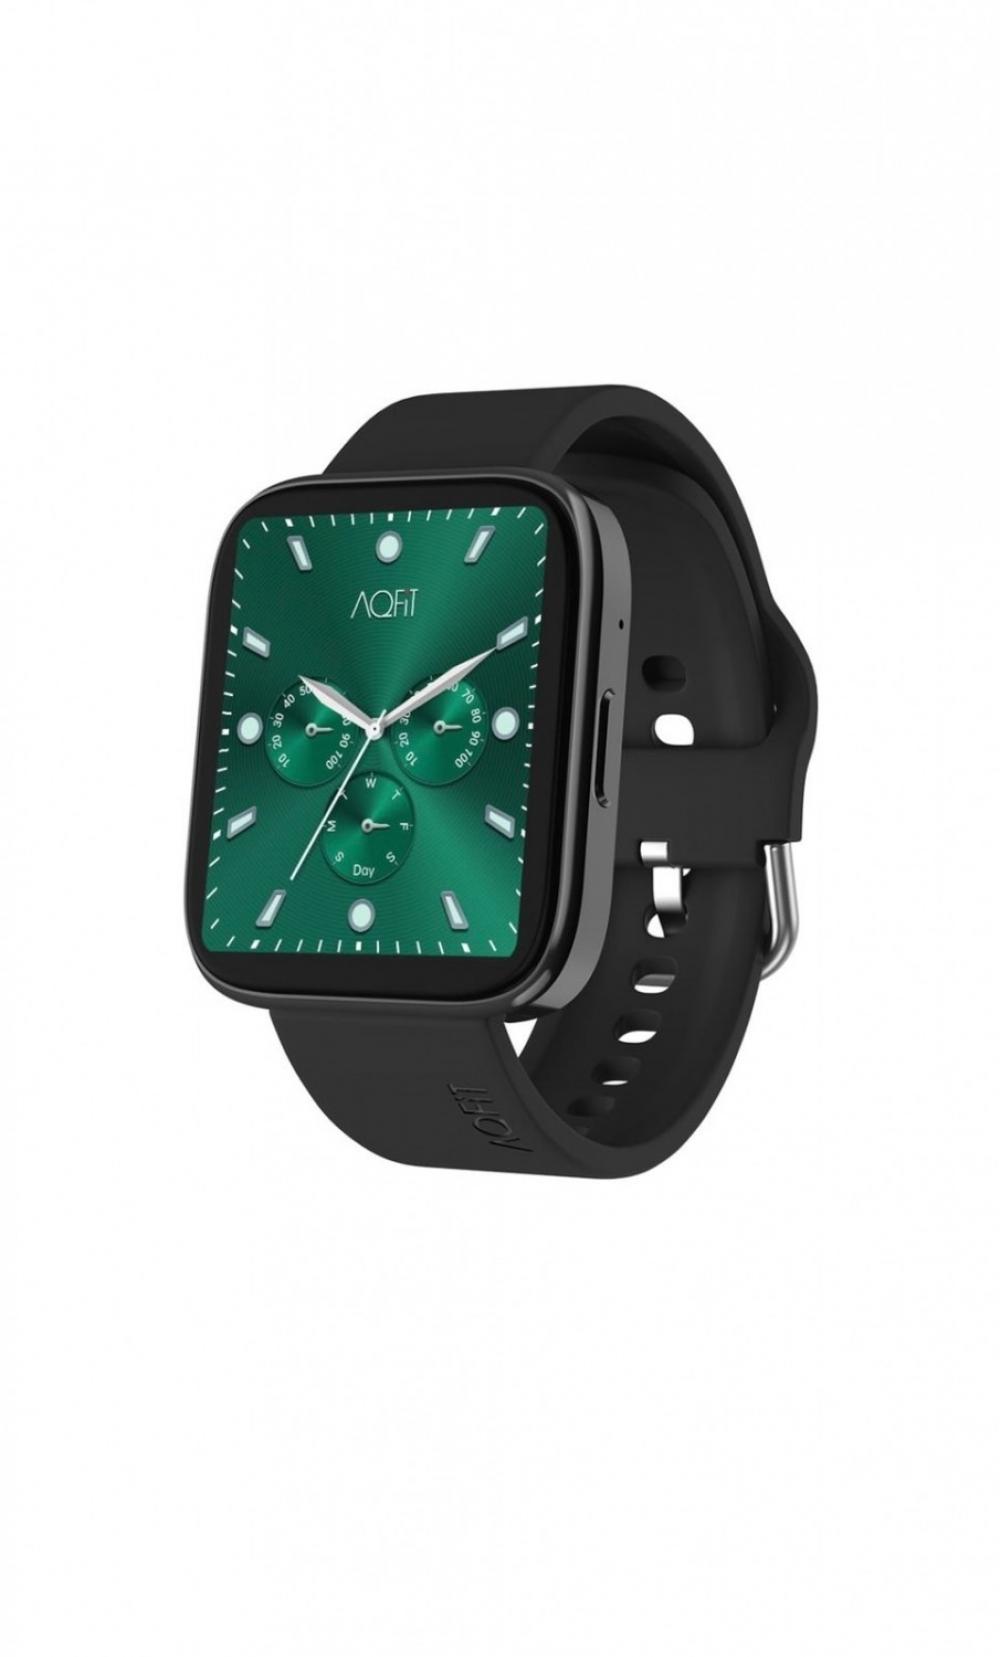 The Weekend Leader - Global smartwatch market reaches 127.5 mn units in 2021: Report